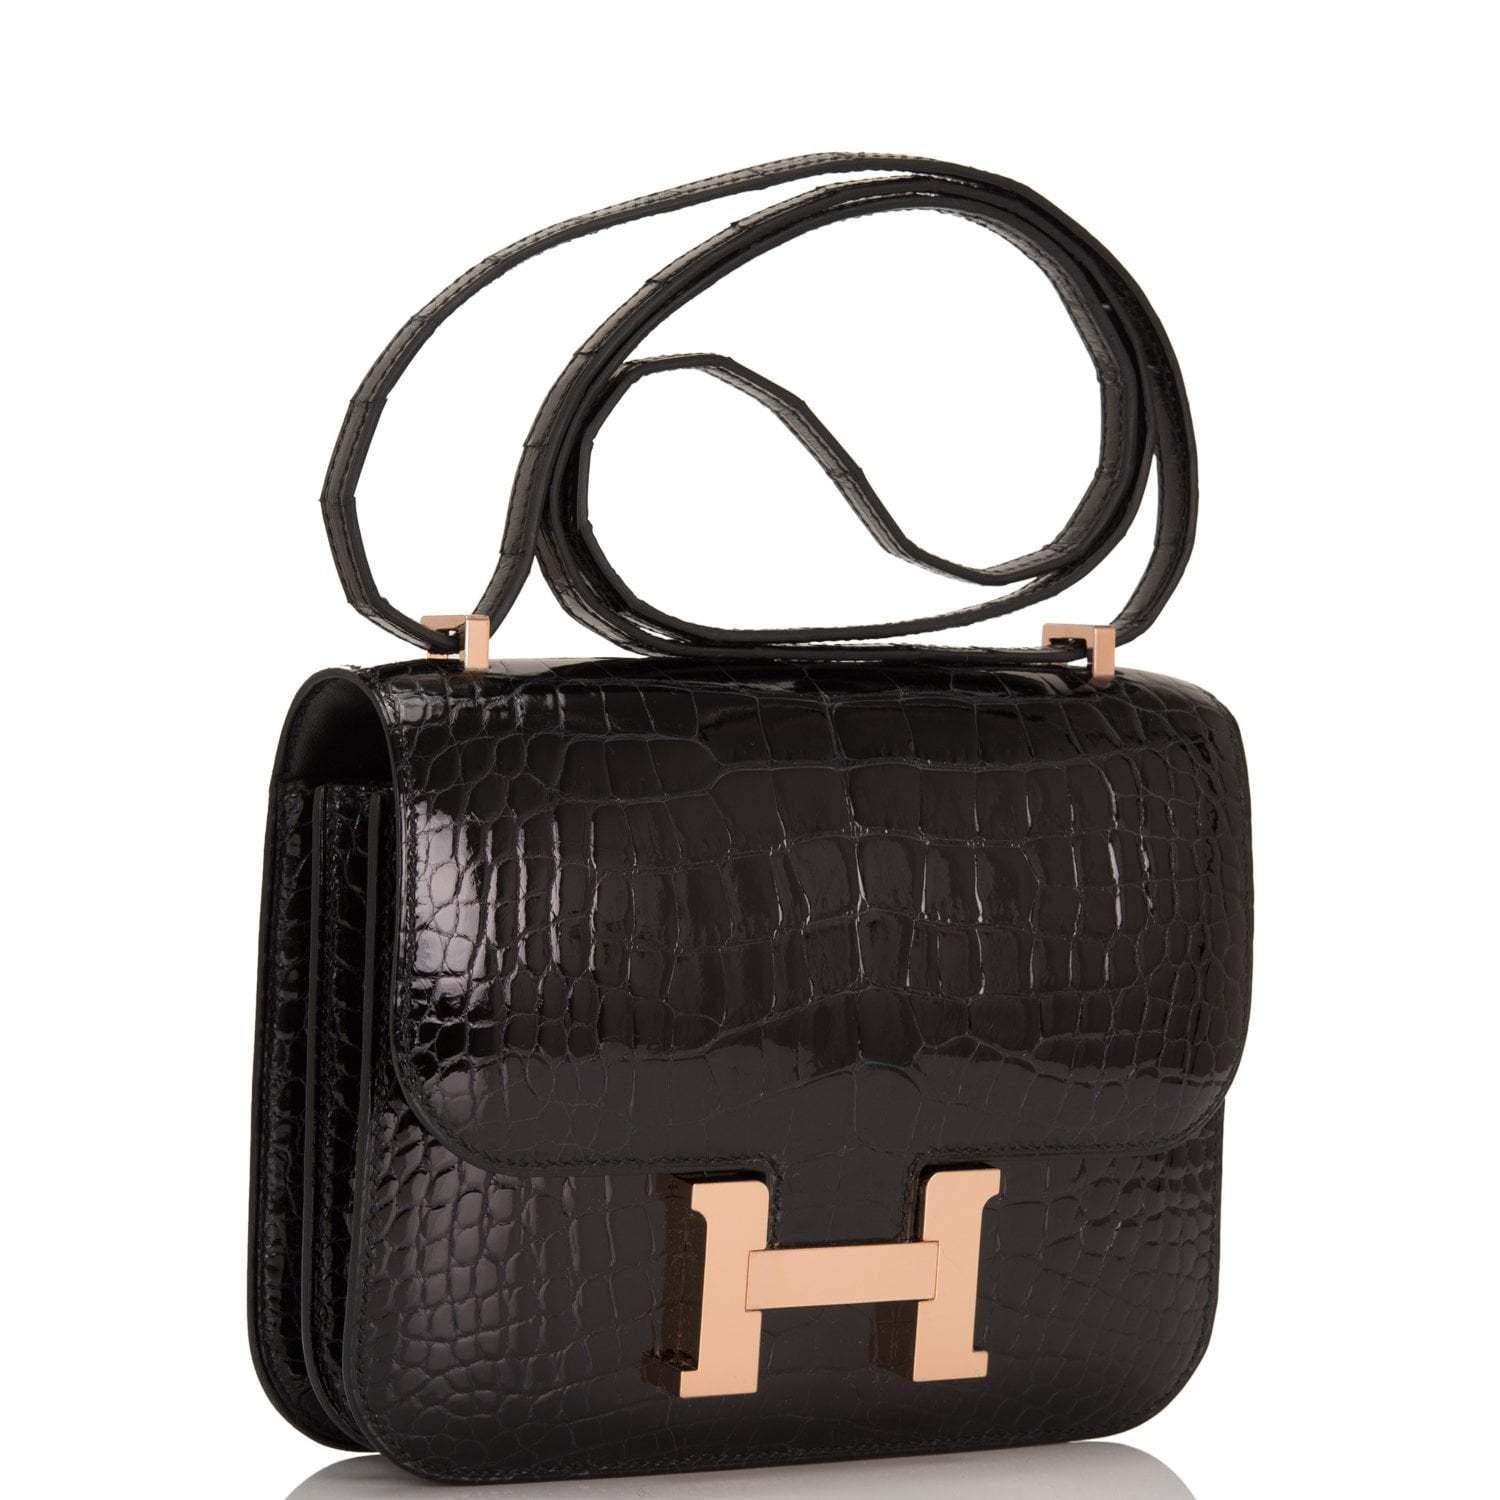 Hermes Alligator Constance
Black 
18/19 Cm 
Shiny 
Rare find!
Absolutely a must have for the avid collector
Rose Gold Hardware, this is the new finish that Hermes has introduced and it gorgeous!
Brand new never used
Collection C
Hermes Box, Cites,